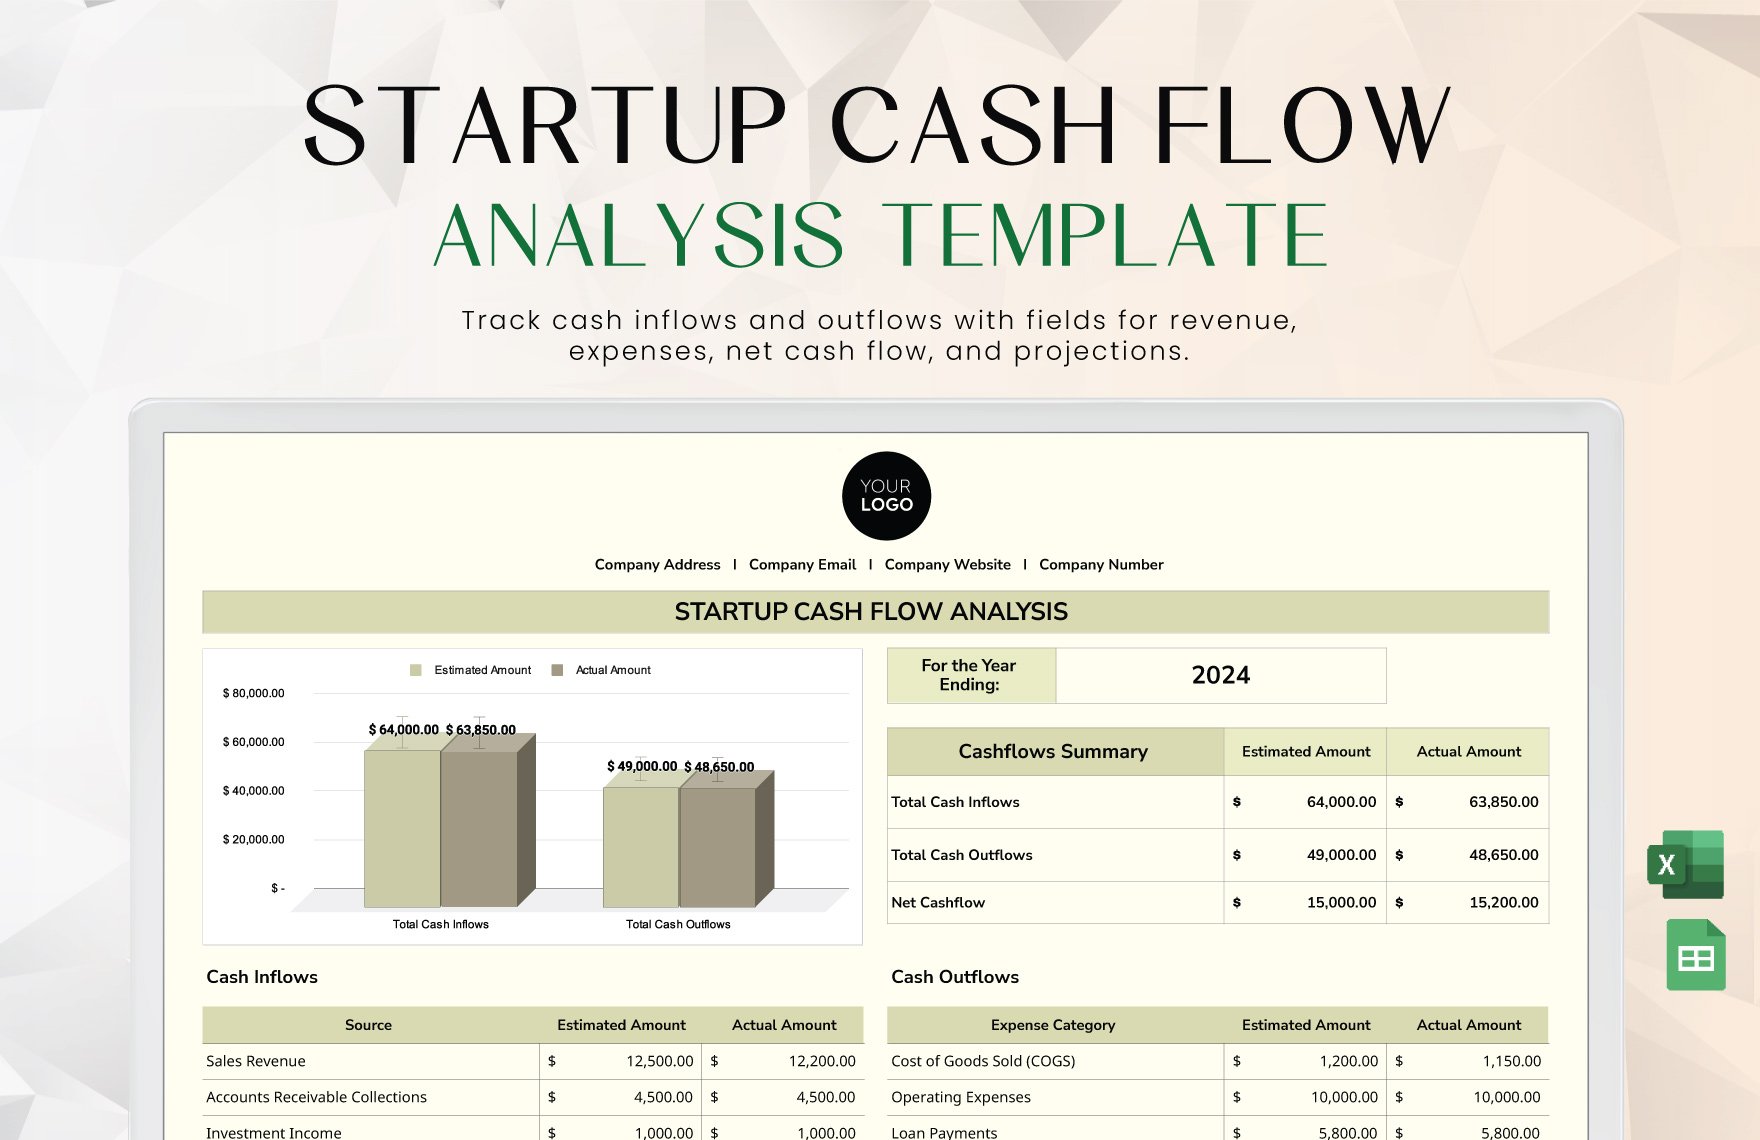 Startup Cash Flow Analysis Template in Excel, Google Sheets